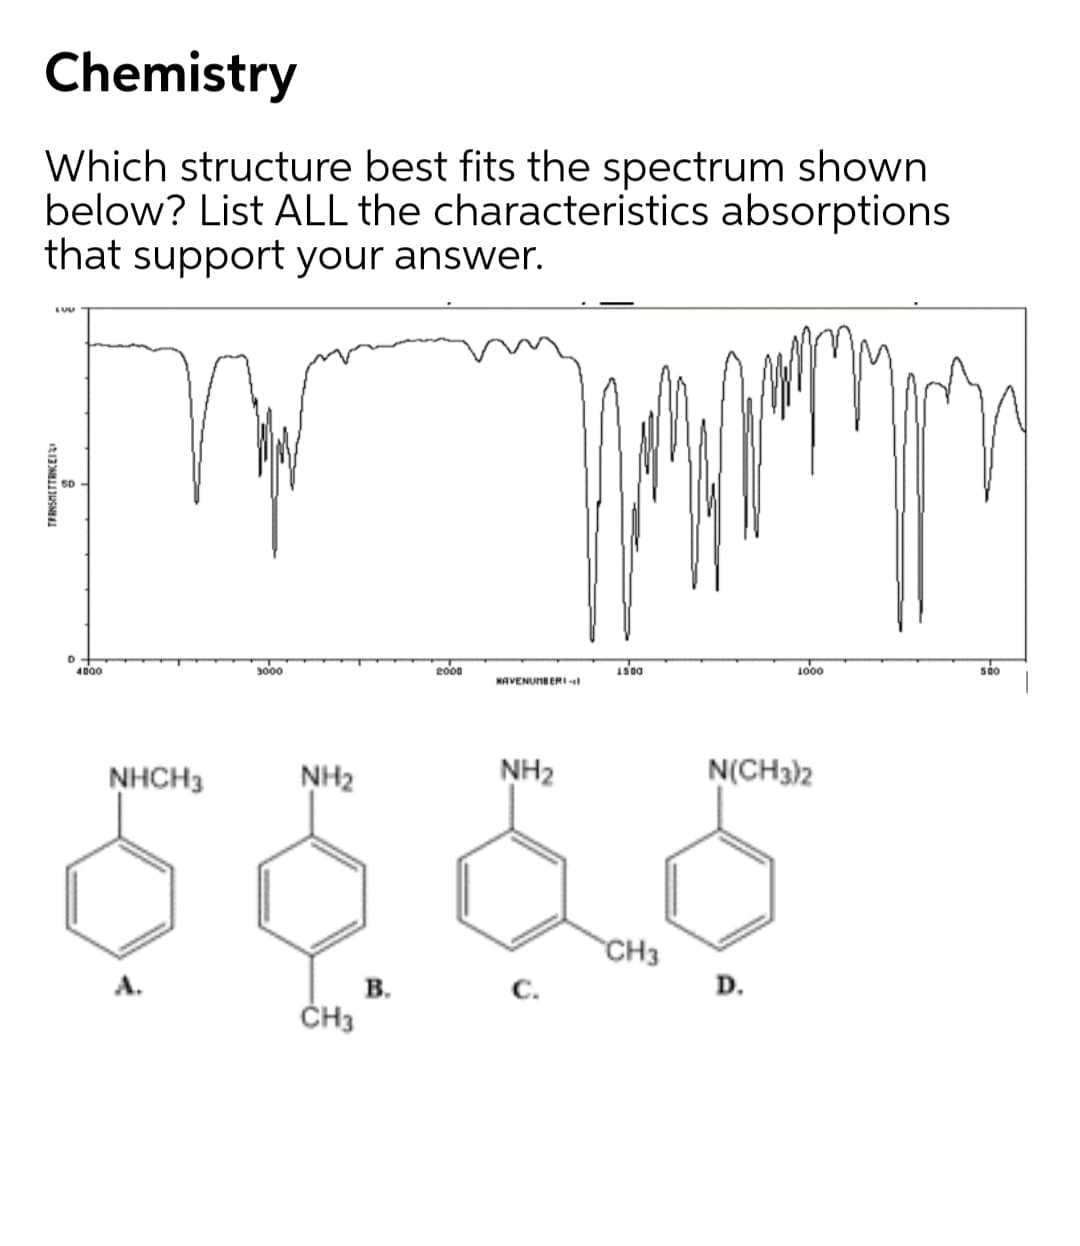 Chemistry
Which structure best fits the spectrum shown
below? List ALL the characteristics absorptions
that support your answer.
4D00
3000
eoon
1500
1000
so
NAVENUMB ERI
NHCH3
NH2
NH2
N(CH3)2
CH3
В.
ČH3
А.
C.
D.
TFANSMETTRNCEII
